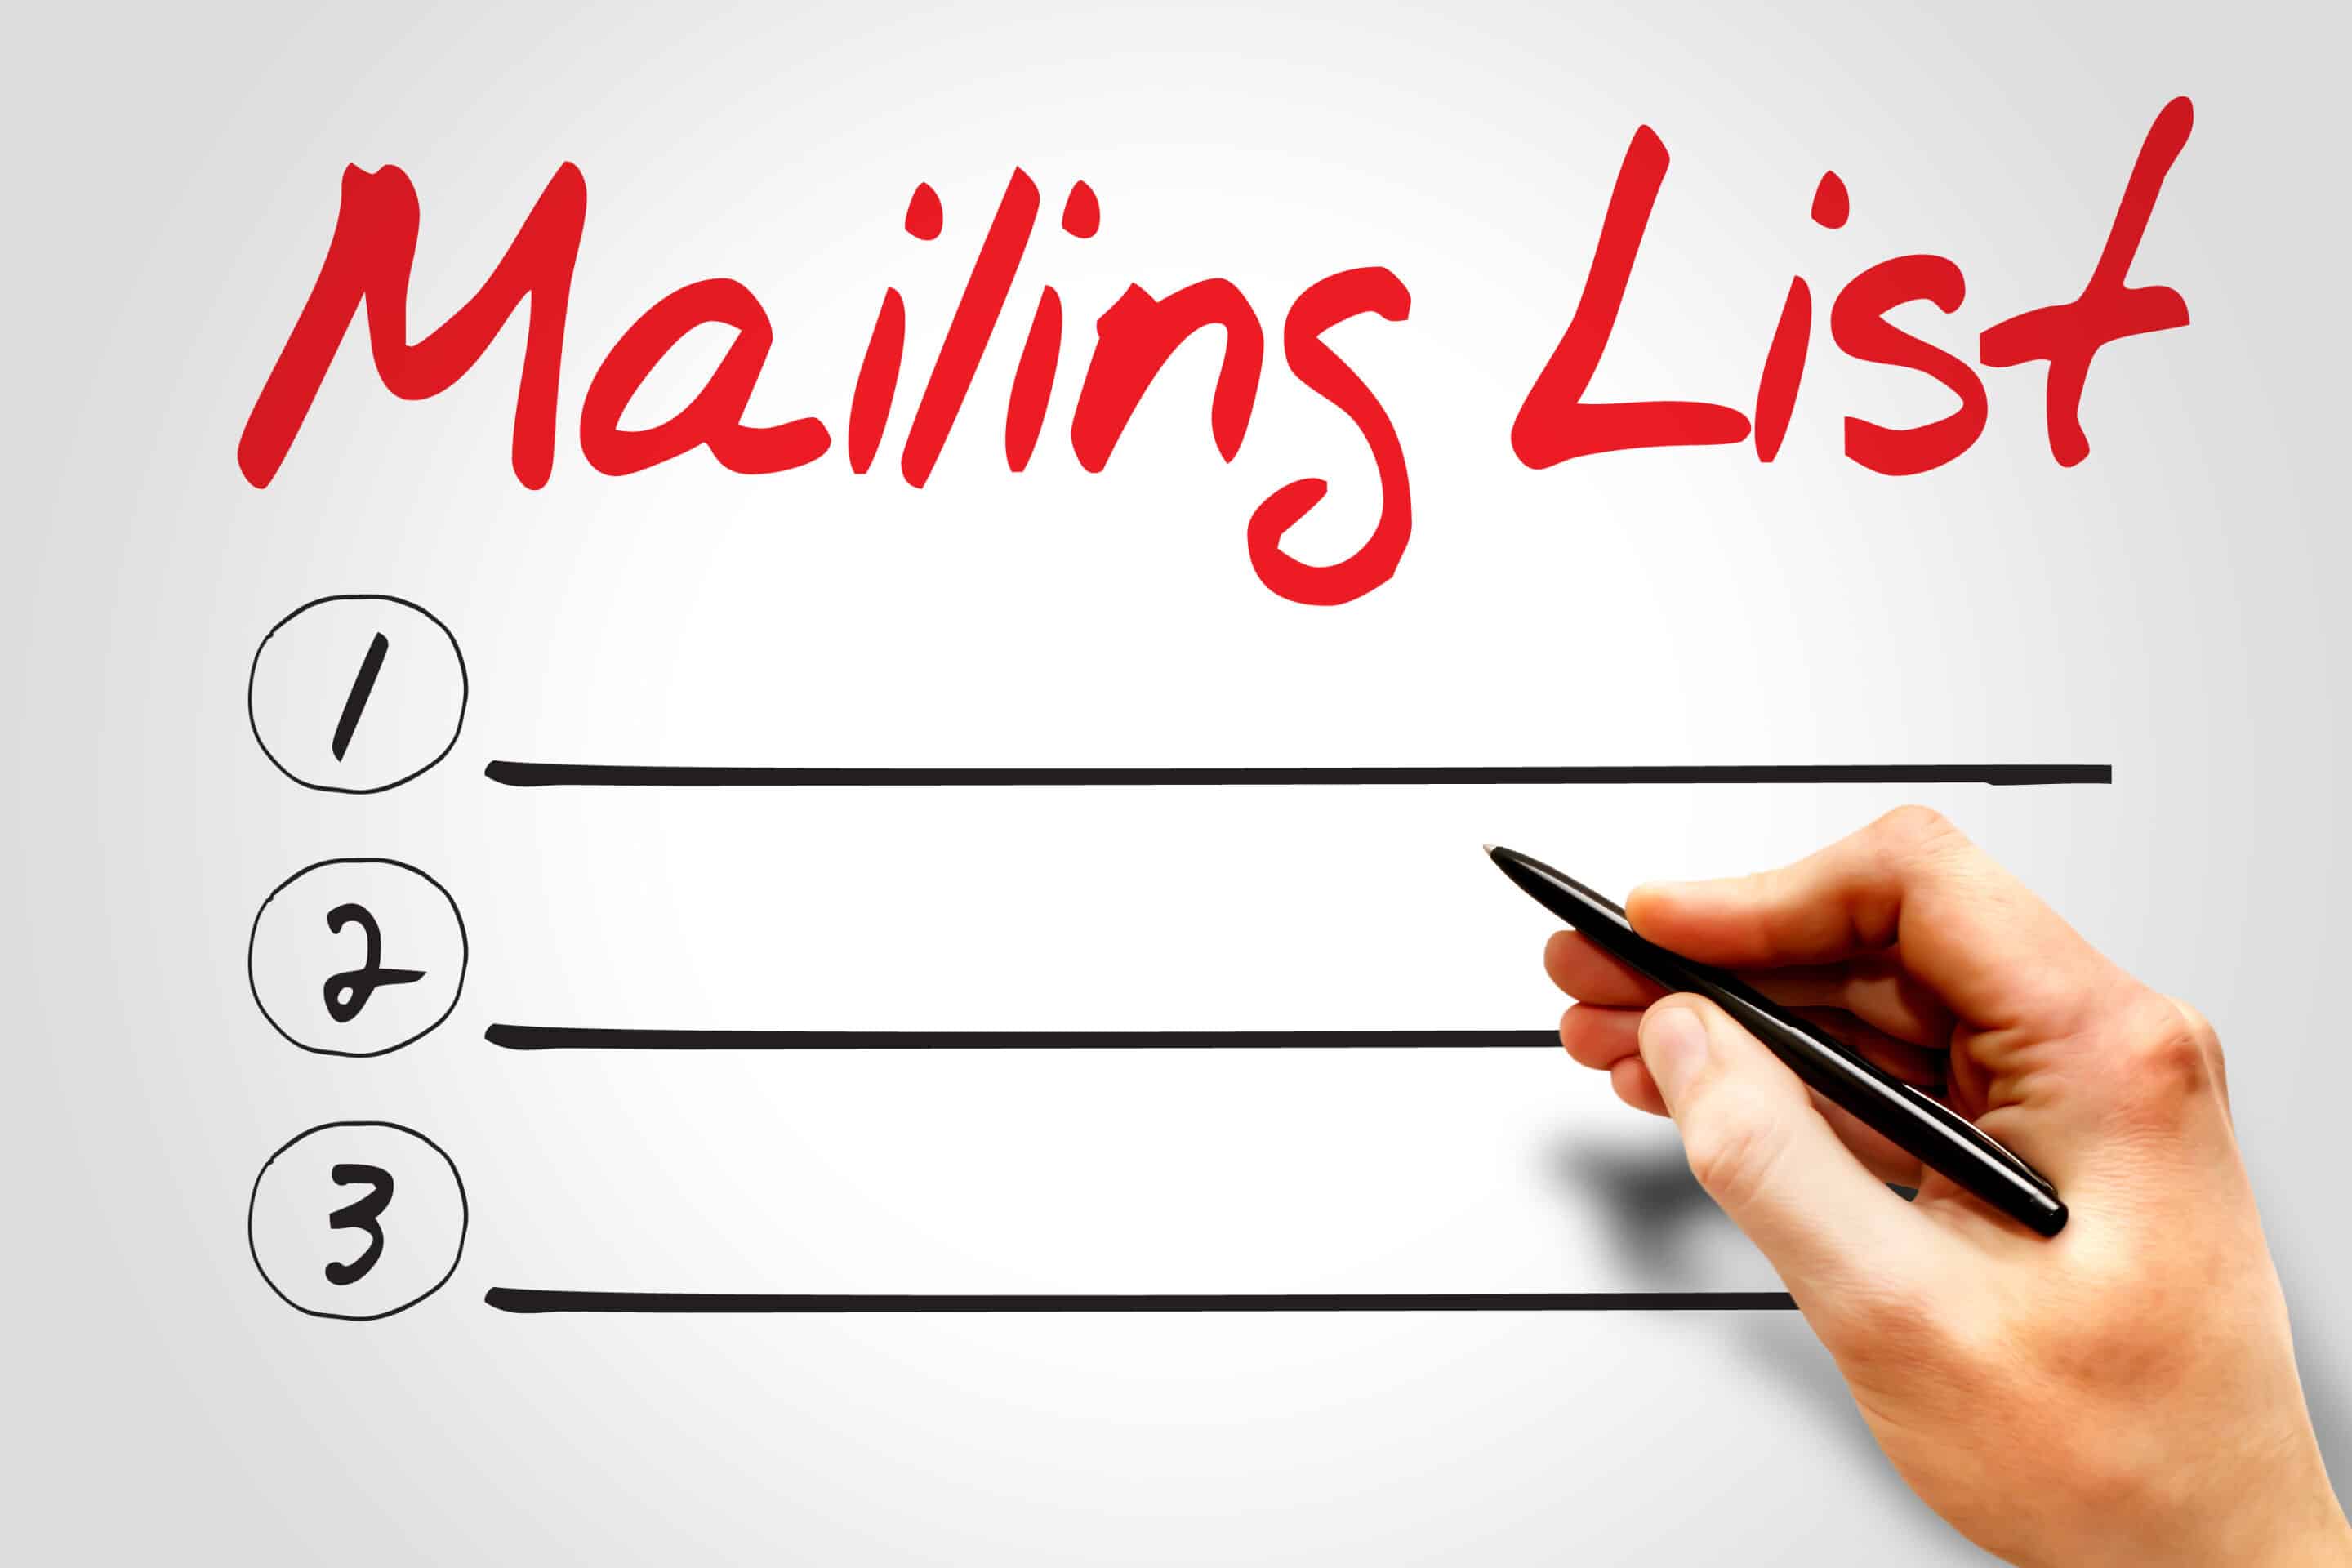 Do I Need An Email List Before I Start To Promote My Business Online?